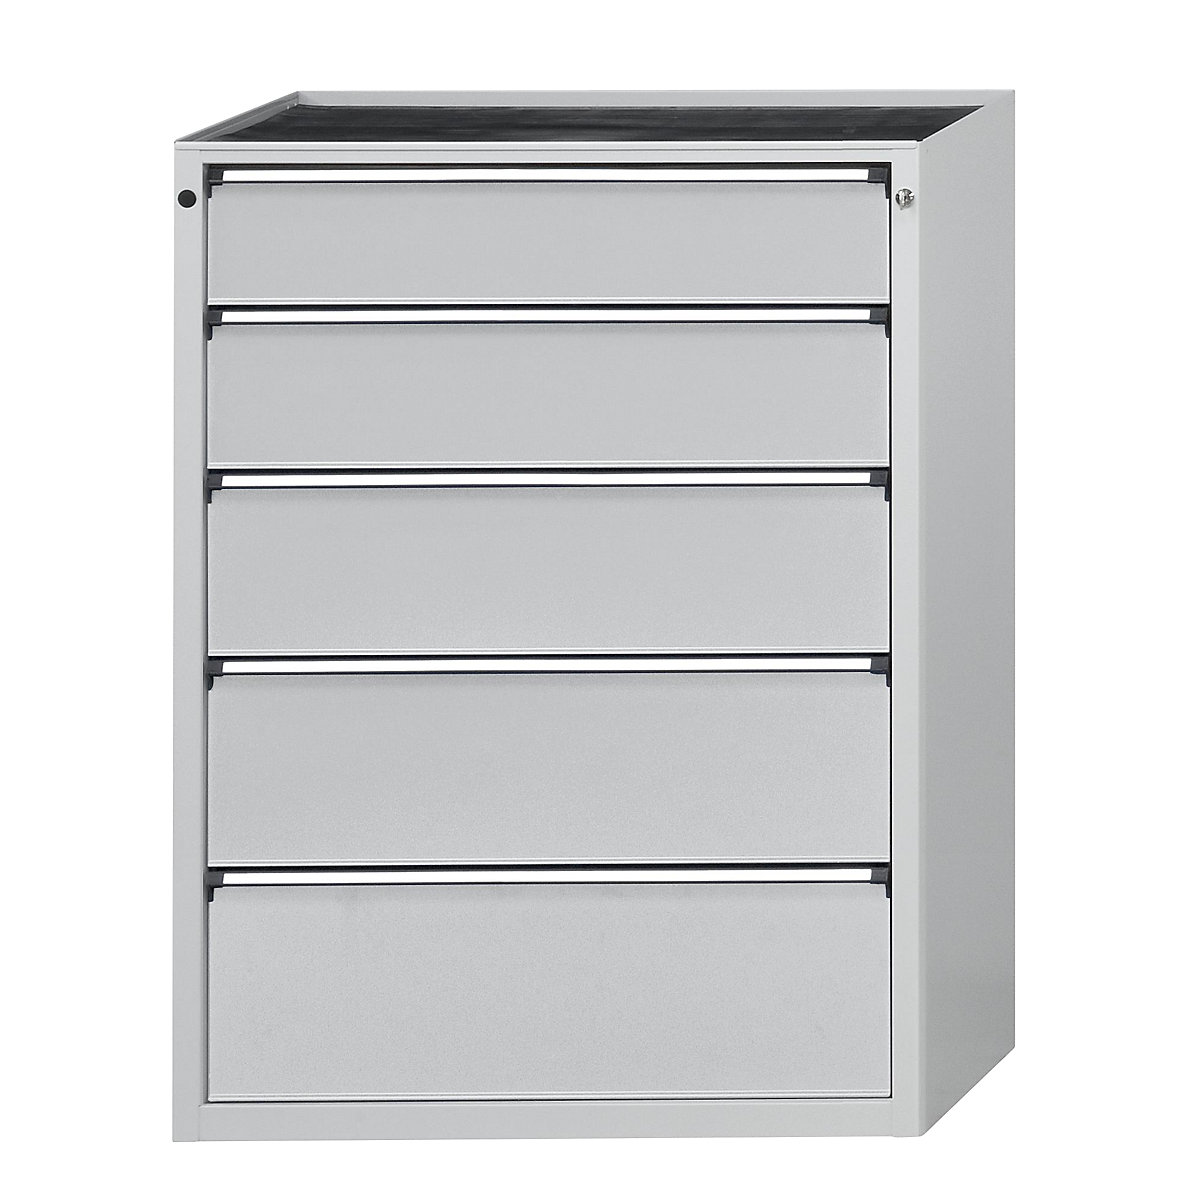 Drawer cupboard – ANKE, WxD 910 x 675 mm, 5 drawers, height 1280 mm, front in light grey-7